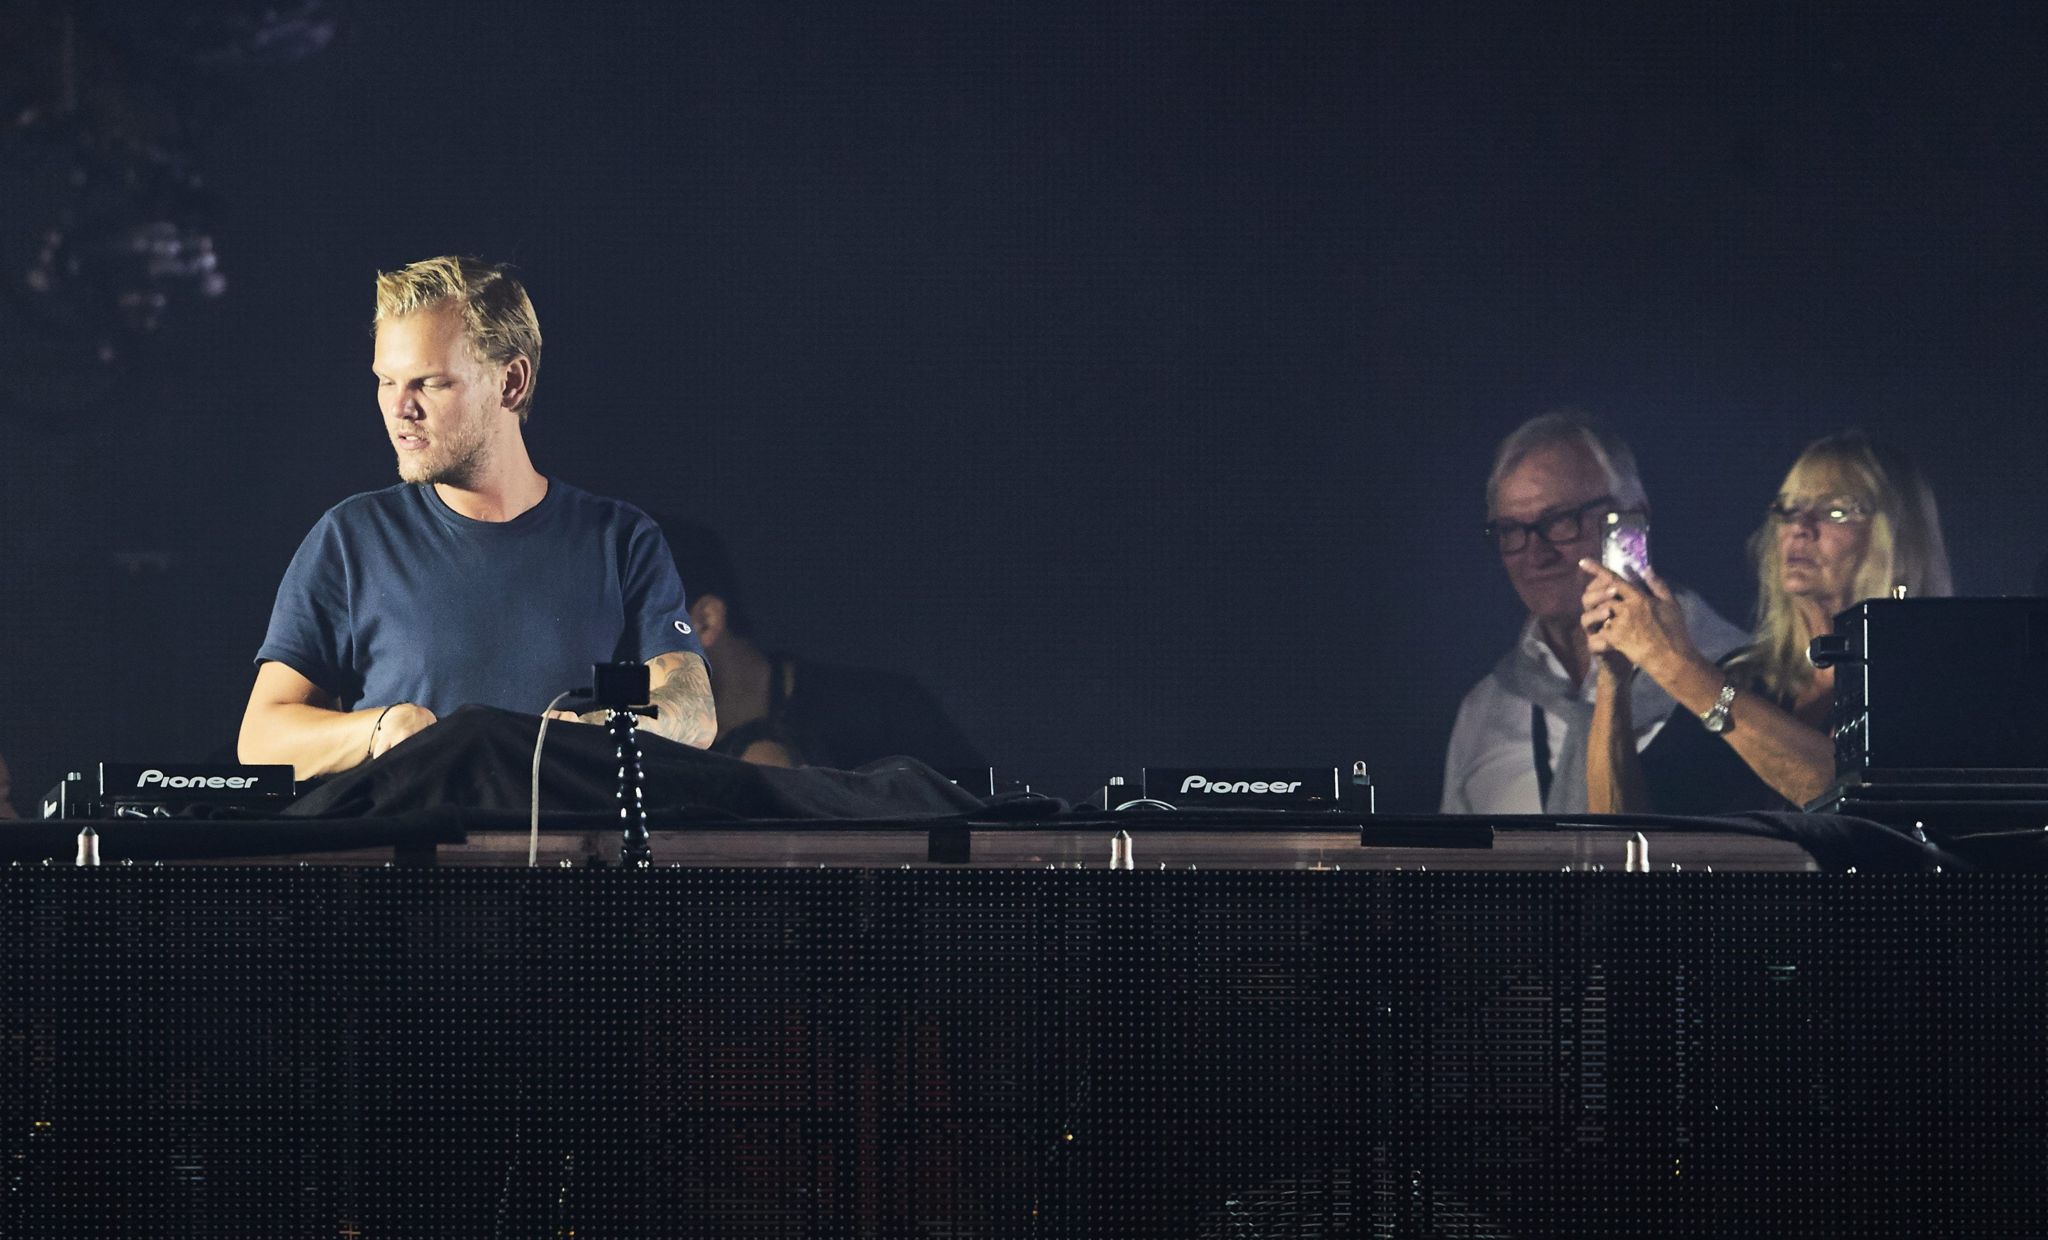 Avicii's parents Klas and actress Anki Liden stand behind him on stage in 2016